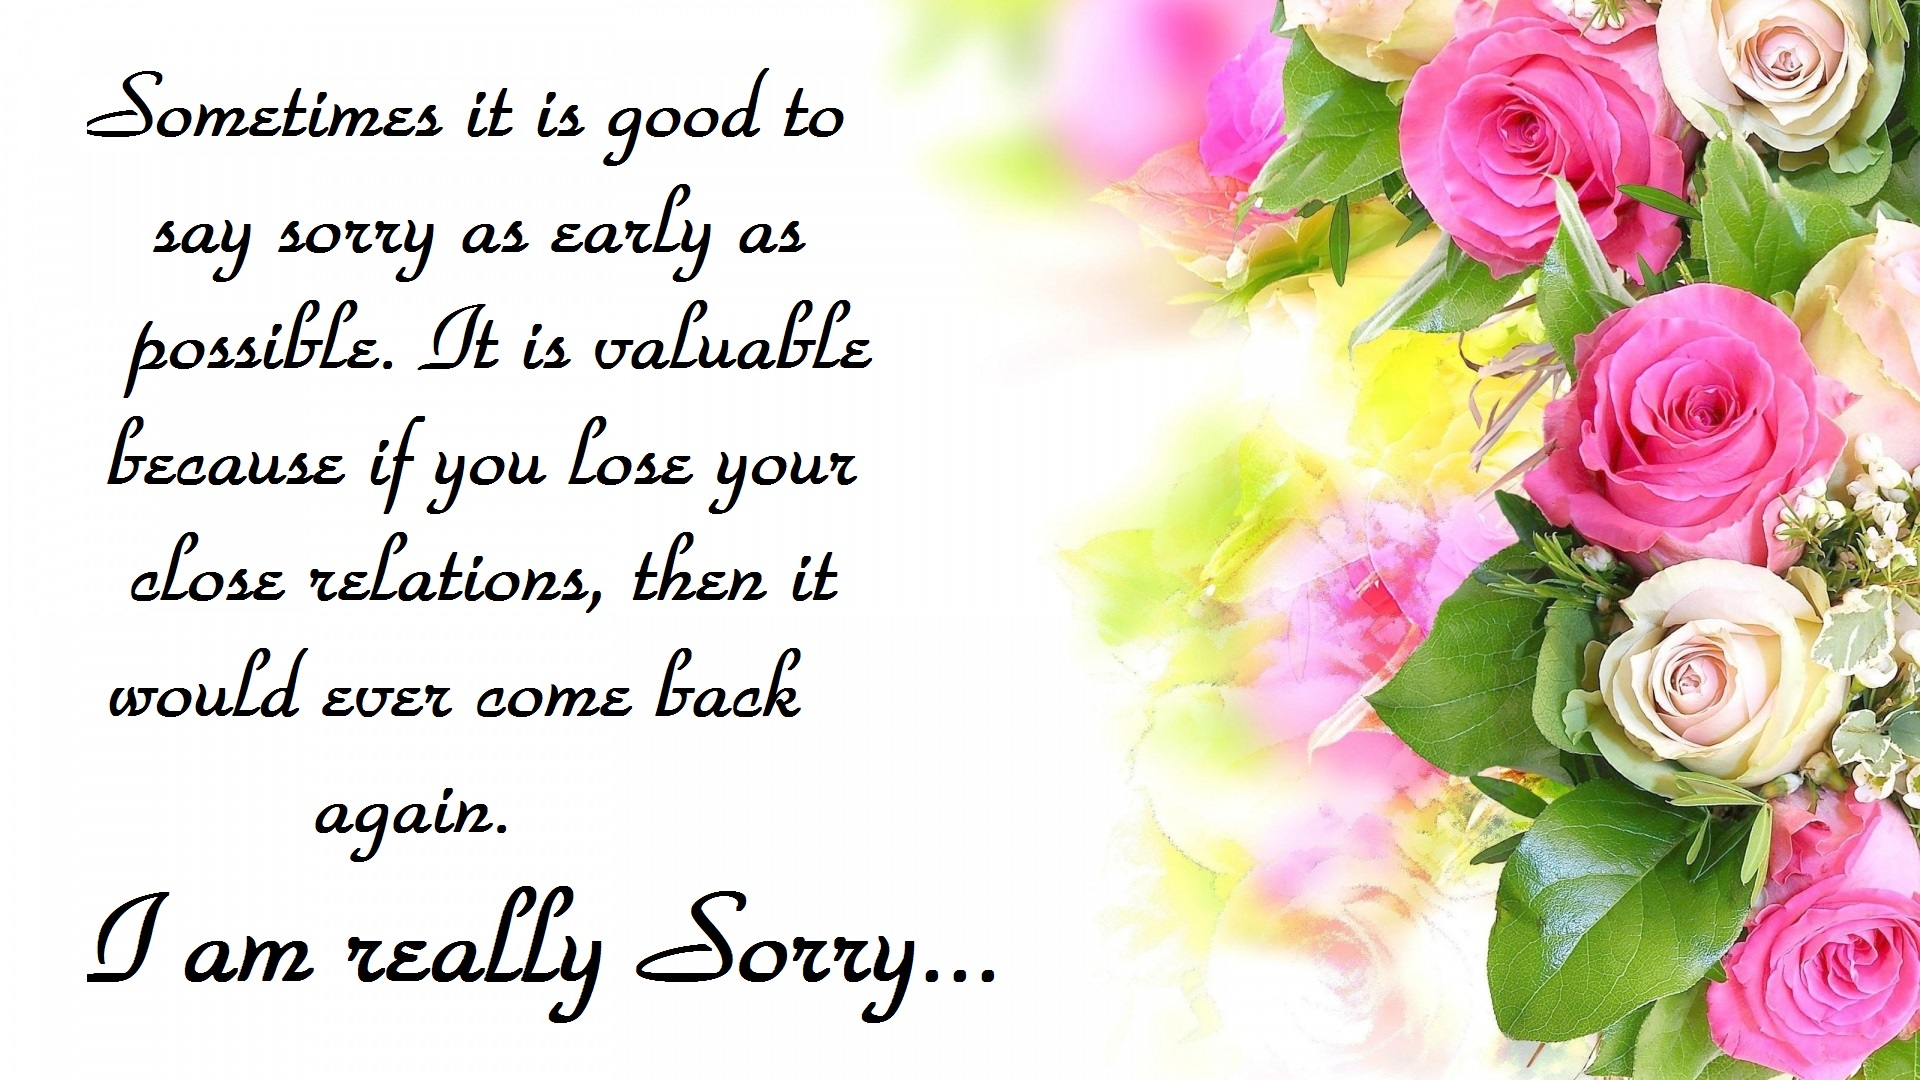 image for sorry messages